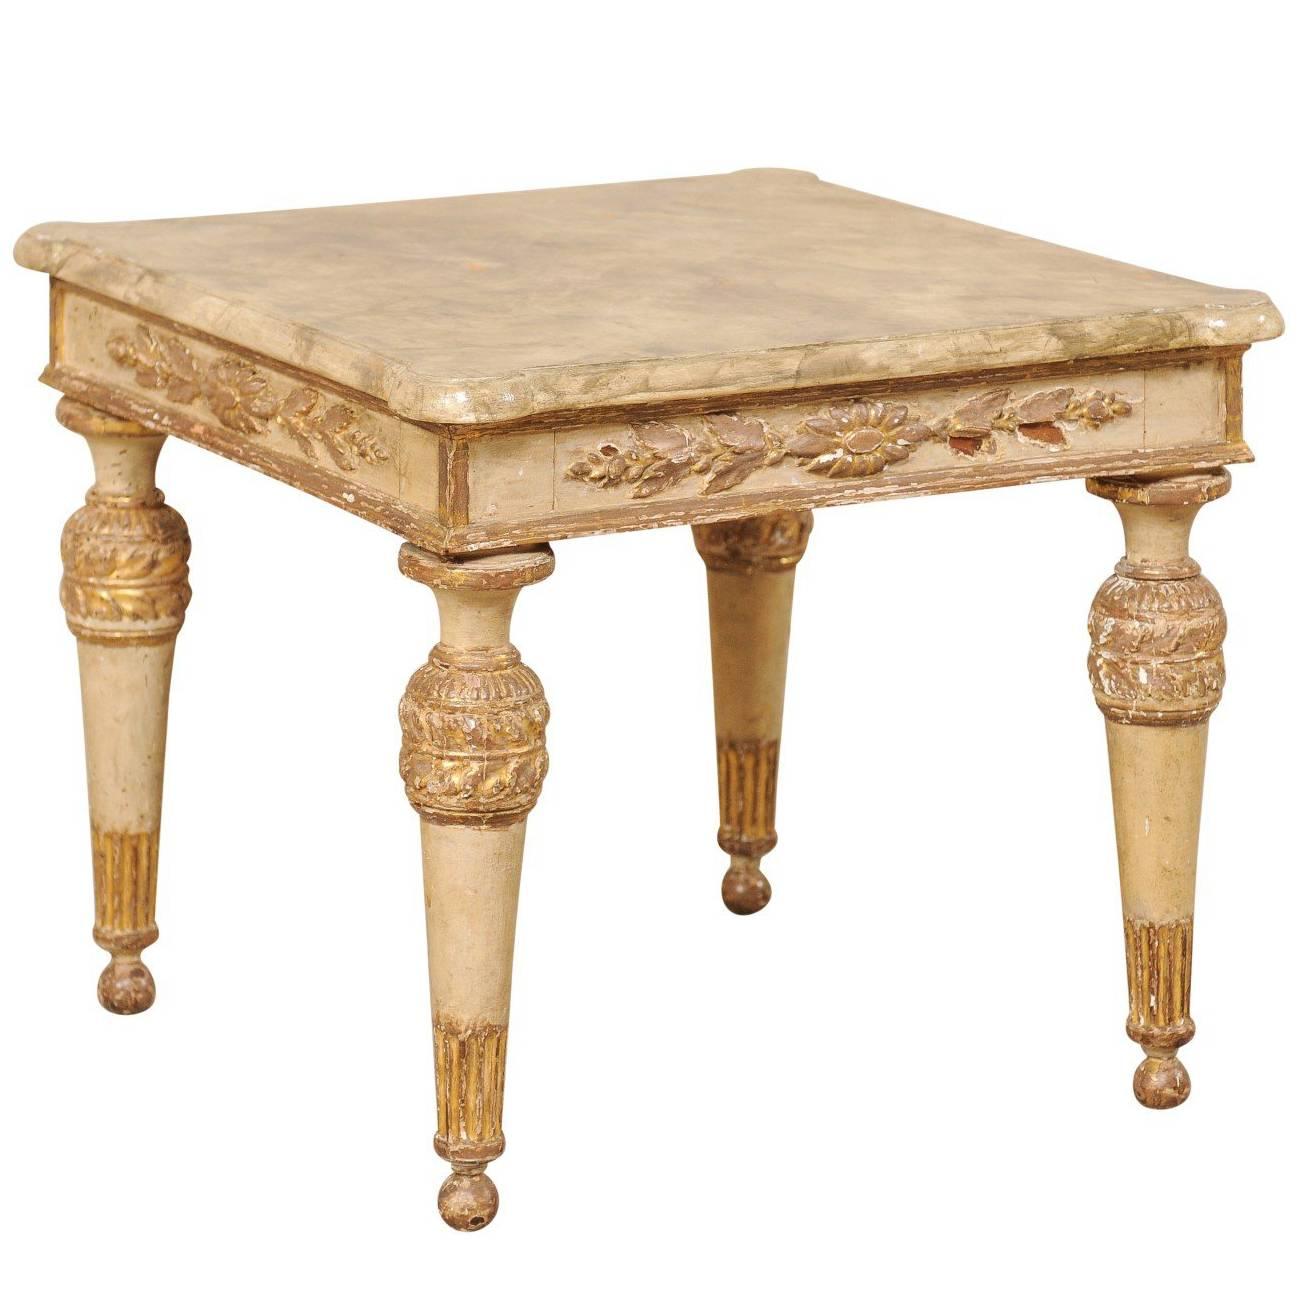 18th Century Italian Carved, Gilded and Painted Wood Side/End Table